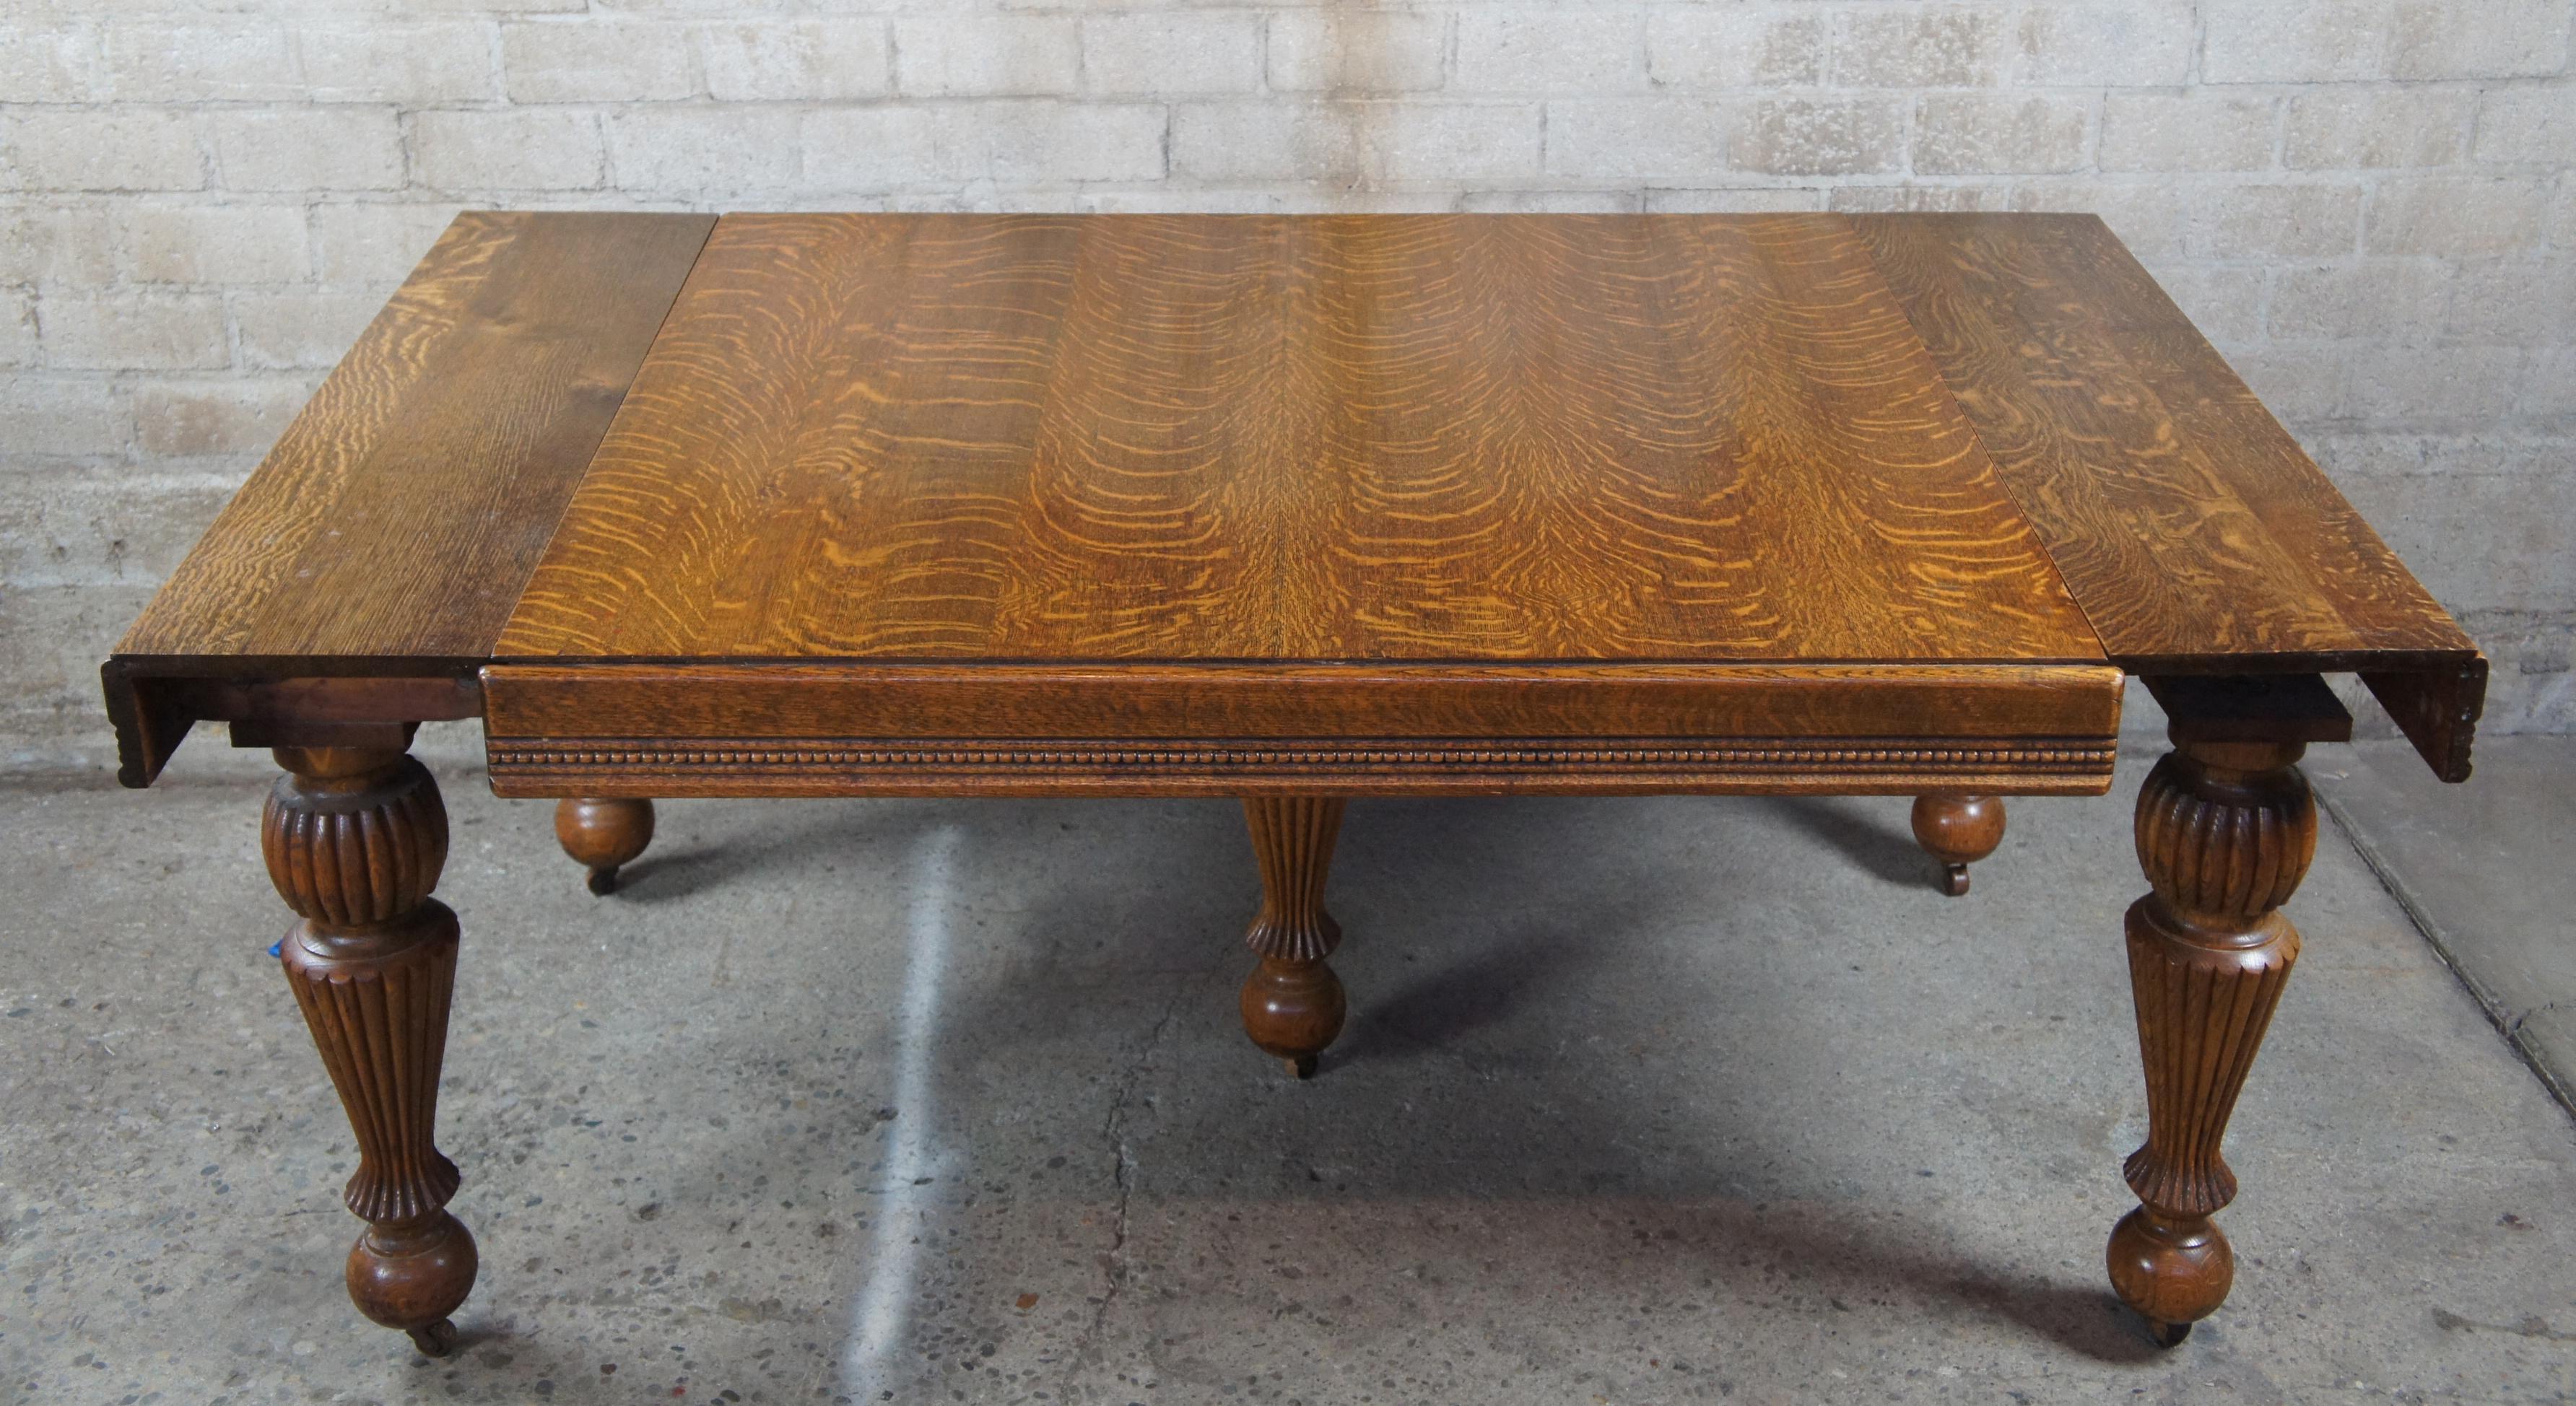 Early 20th Century Antique Victorian Quartersawn Oak Drawl Leaf Extendable Square Dining Table